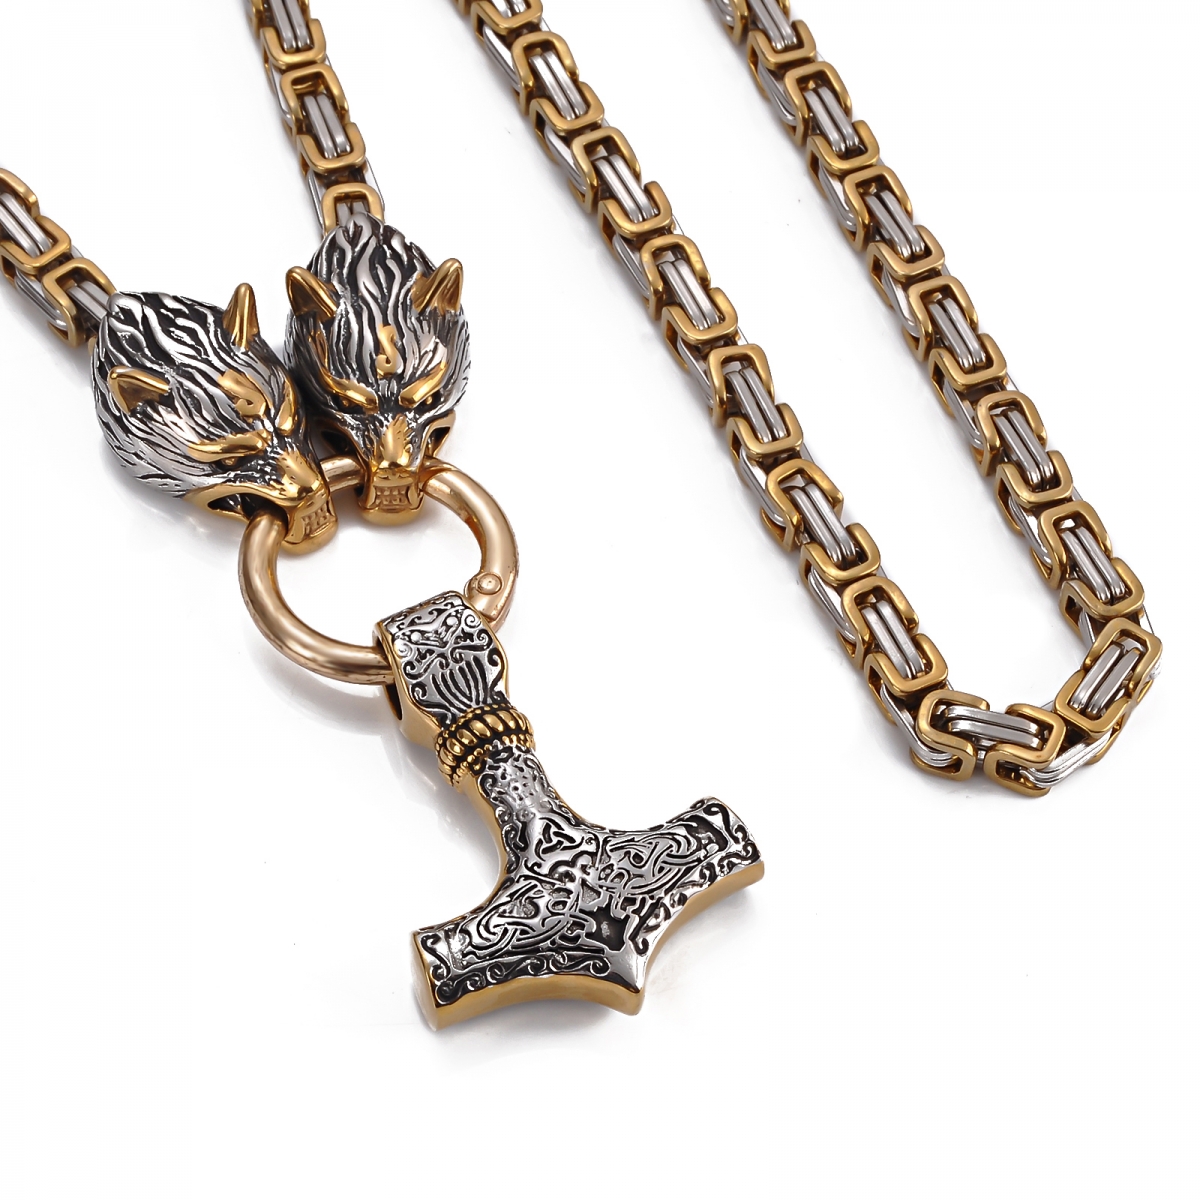 King Chain Viking Thor Mjolnir Hammer Necklace US$13/PC-NORSECOLLECTION- Viking Jewelry,Viking Necklace,Viking Bracelet,Viking Rings,Viking Mugs,Viking Accessories,Viking Crafts